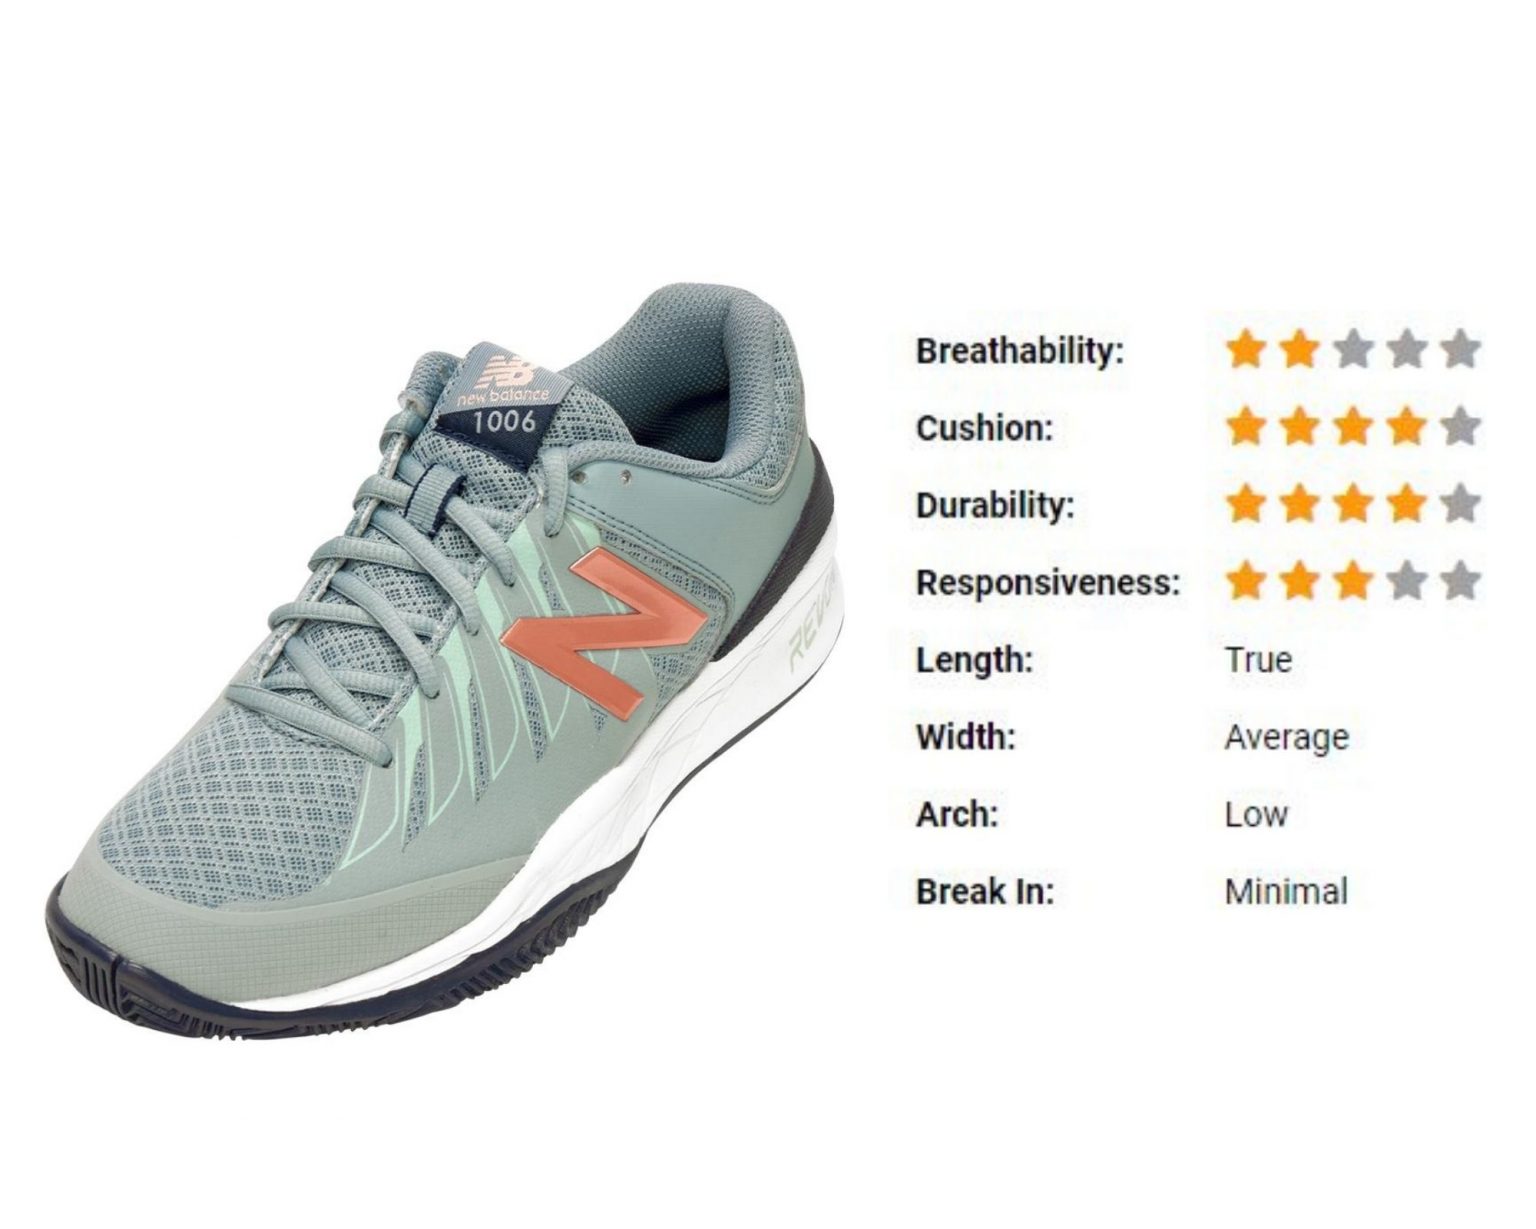 Best Selling Women's Tennis Shoes for 2020 - TENNIS EXPRESS BLOG